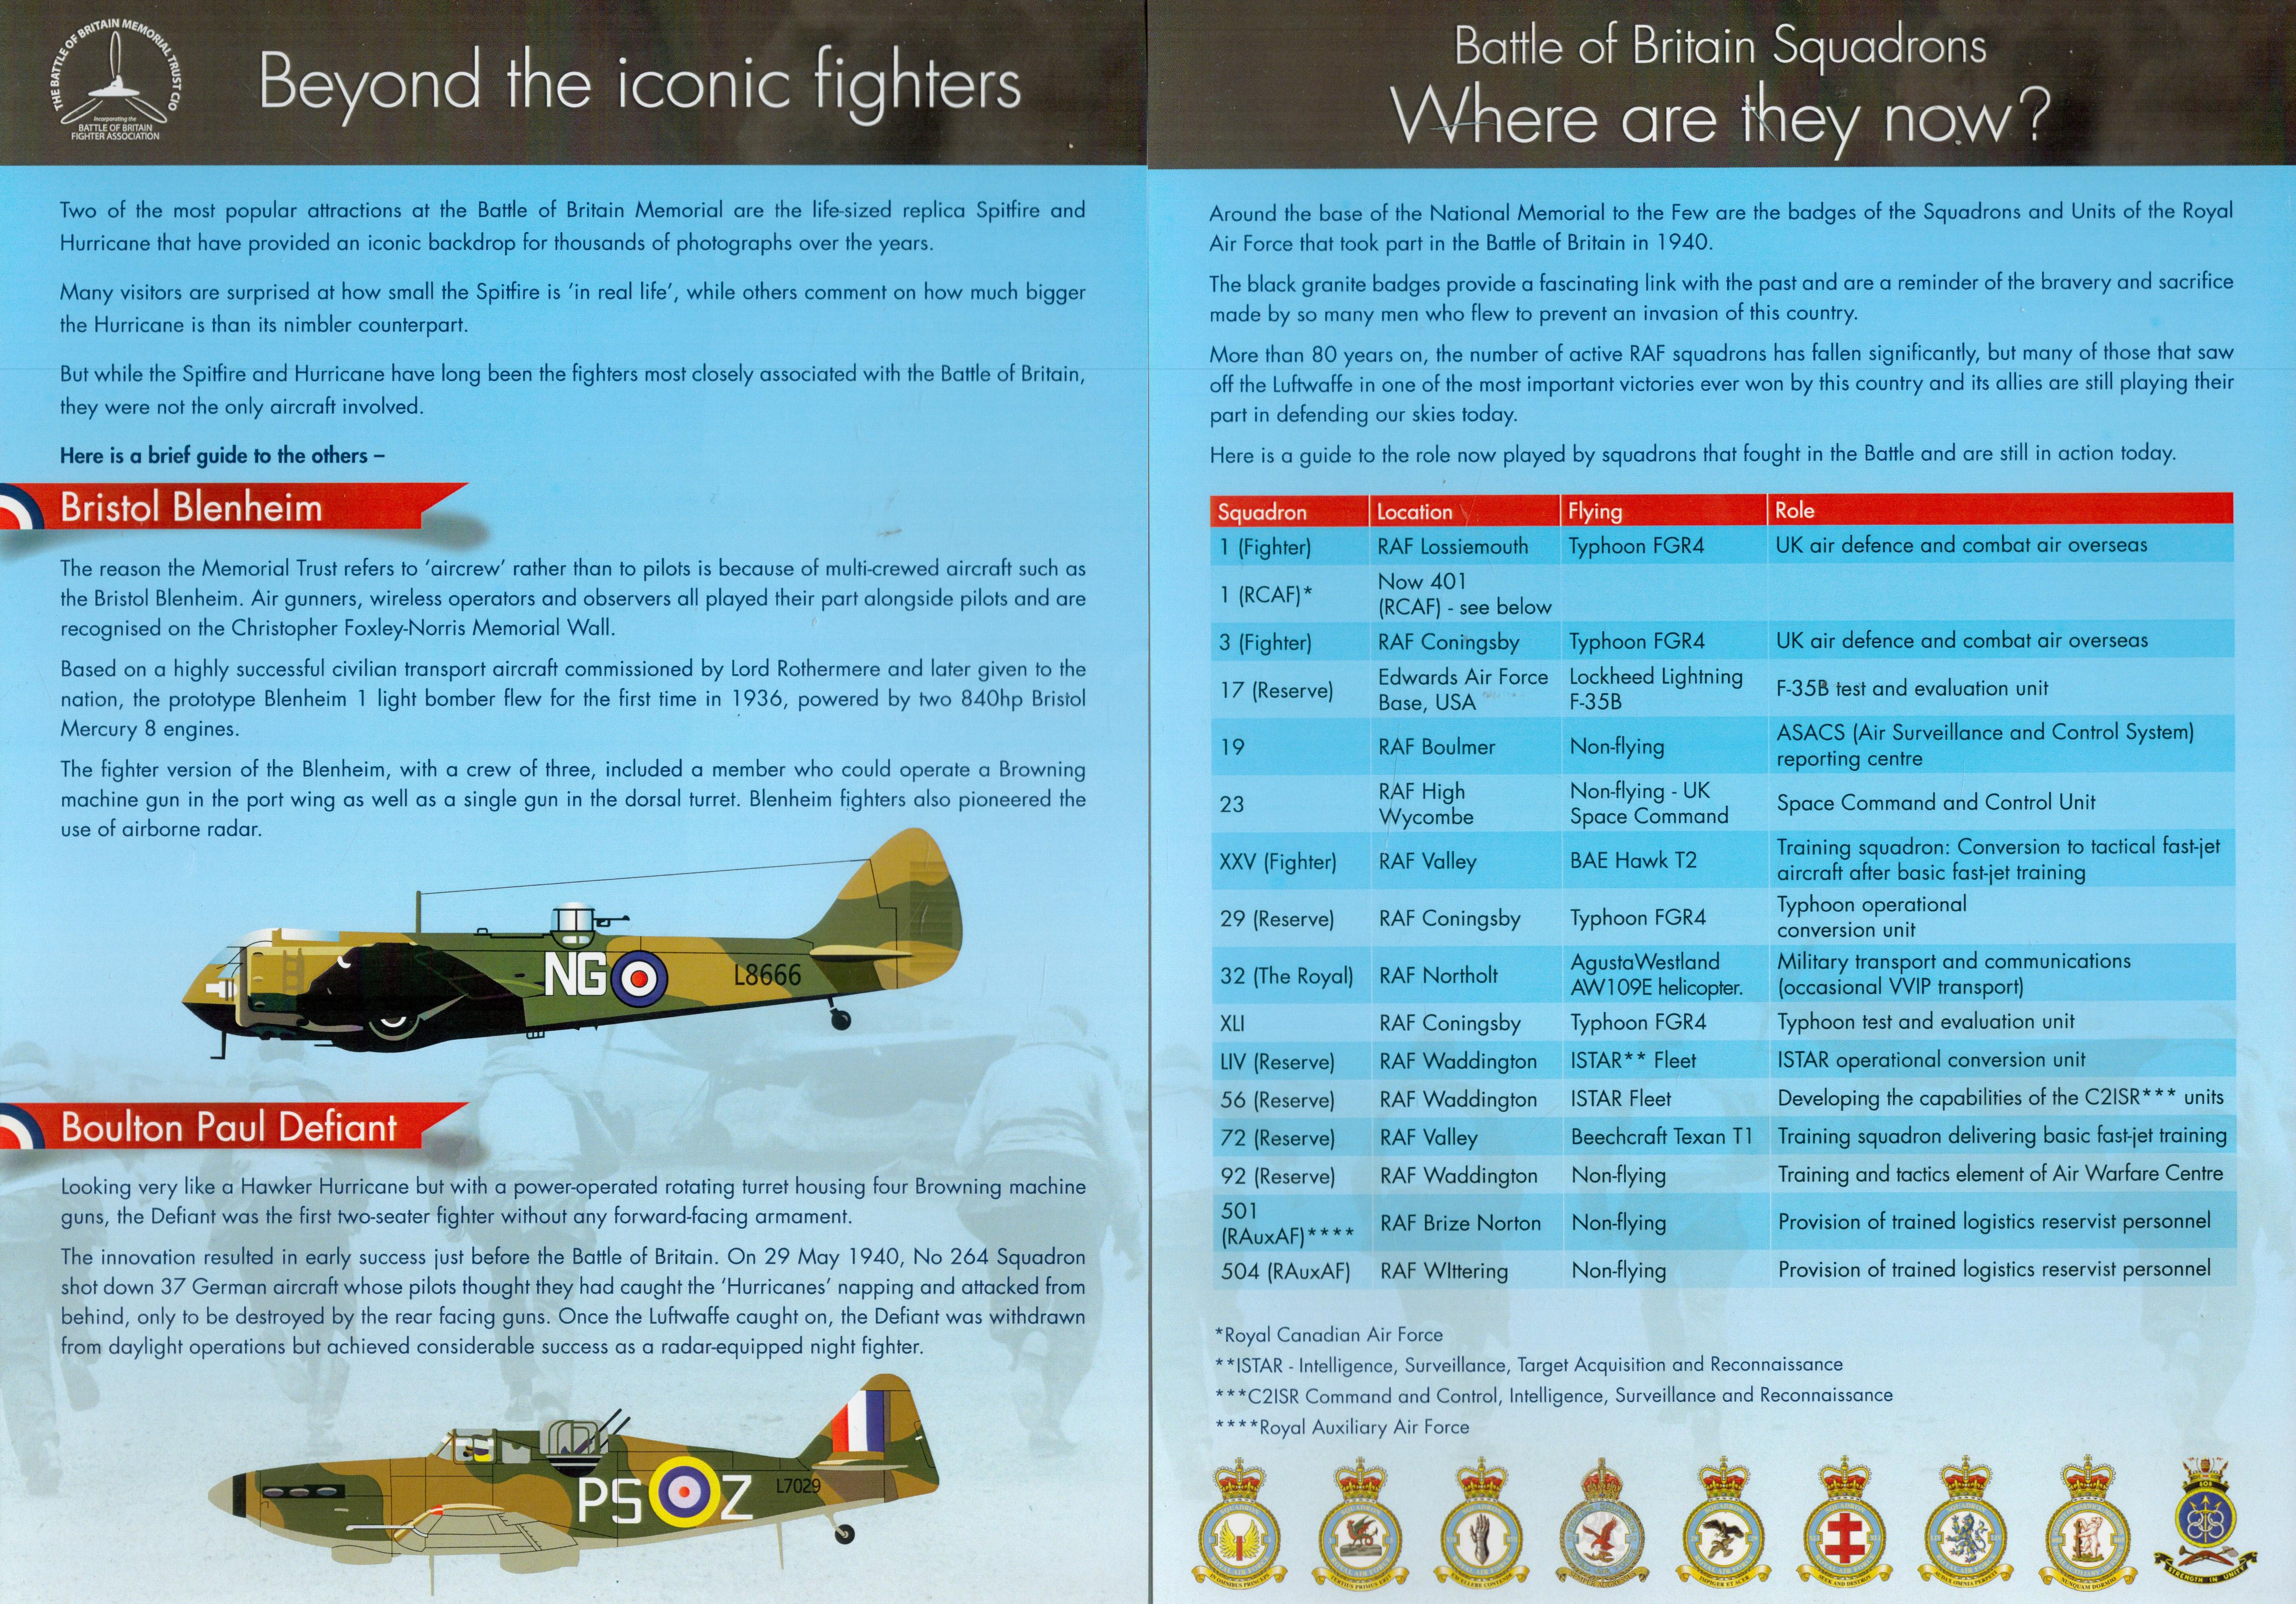 Battle of Britain Collection of Facts Sheets 1-4 from the Battle of Britain Museum in Capel Le Ferne